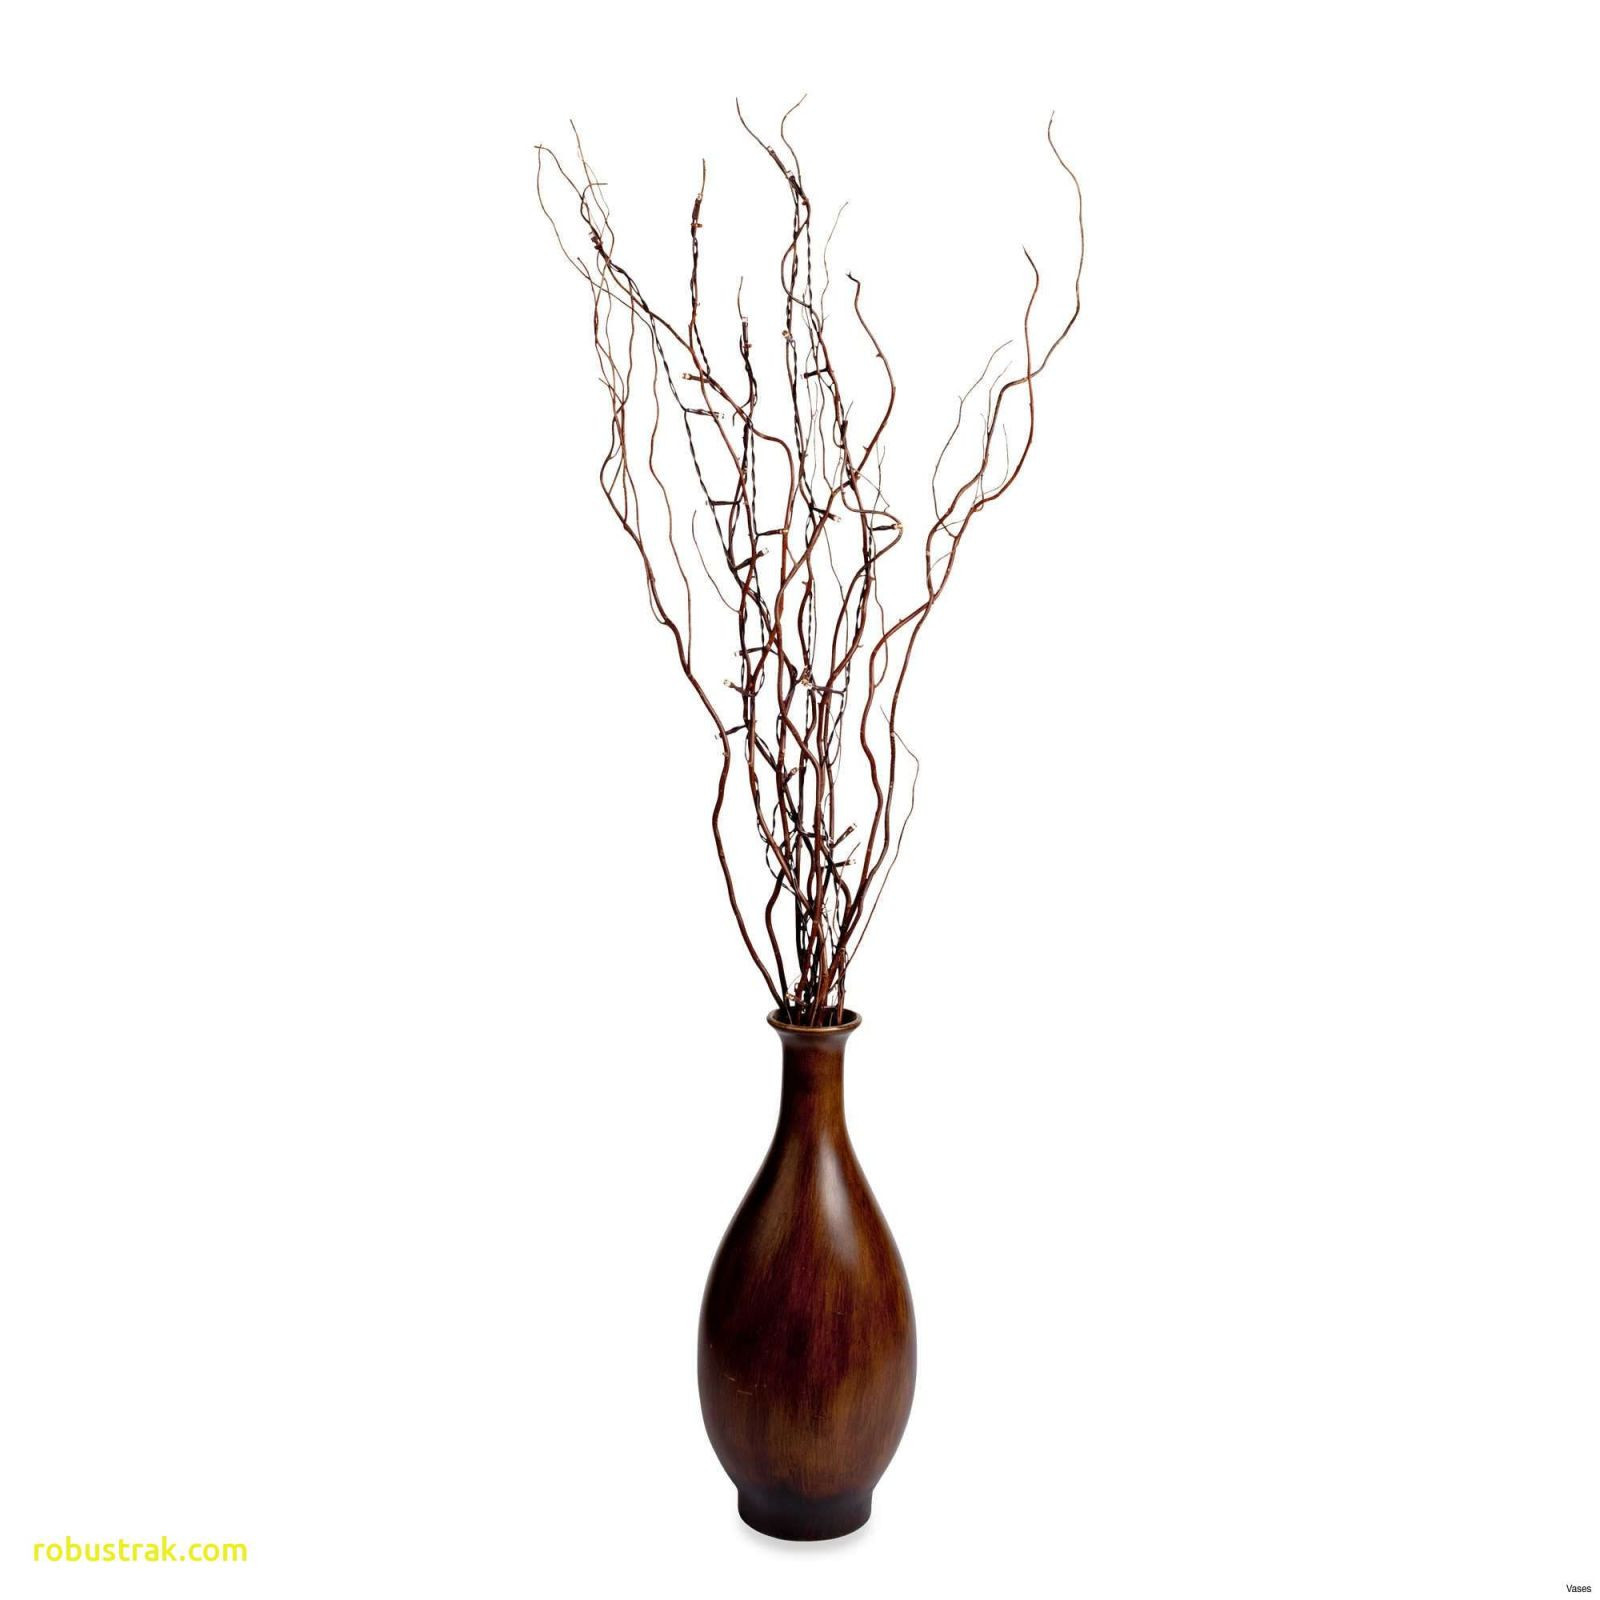 12 attractive Led Branch Lights In Vase 2024 free download led branch lights in vase of decorative twigs for vases images decorative twig branch lights for decorative twigs for vases photograph excellent twigs and sticks ff14 documentaries for chang